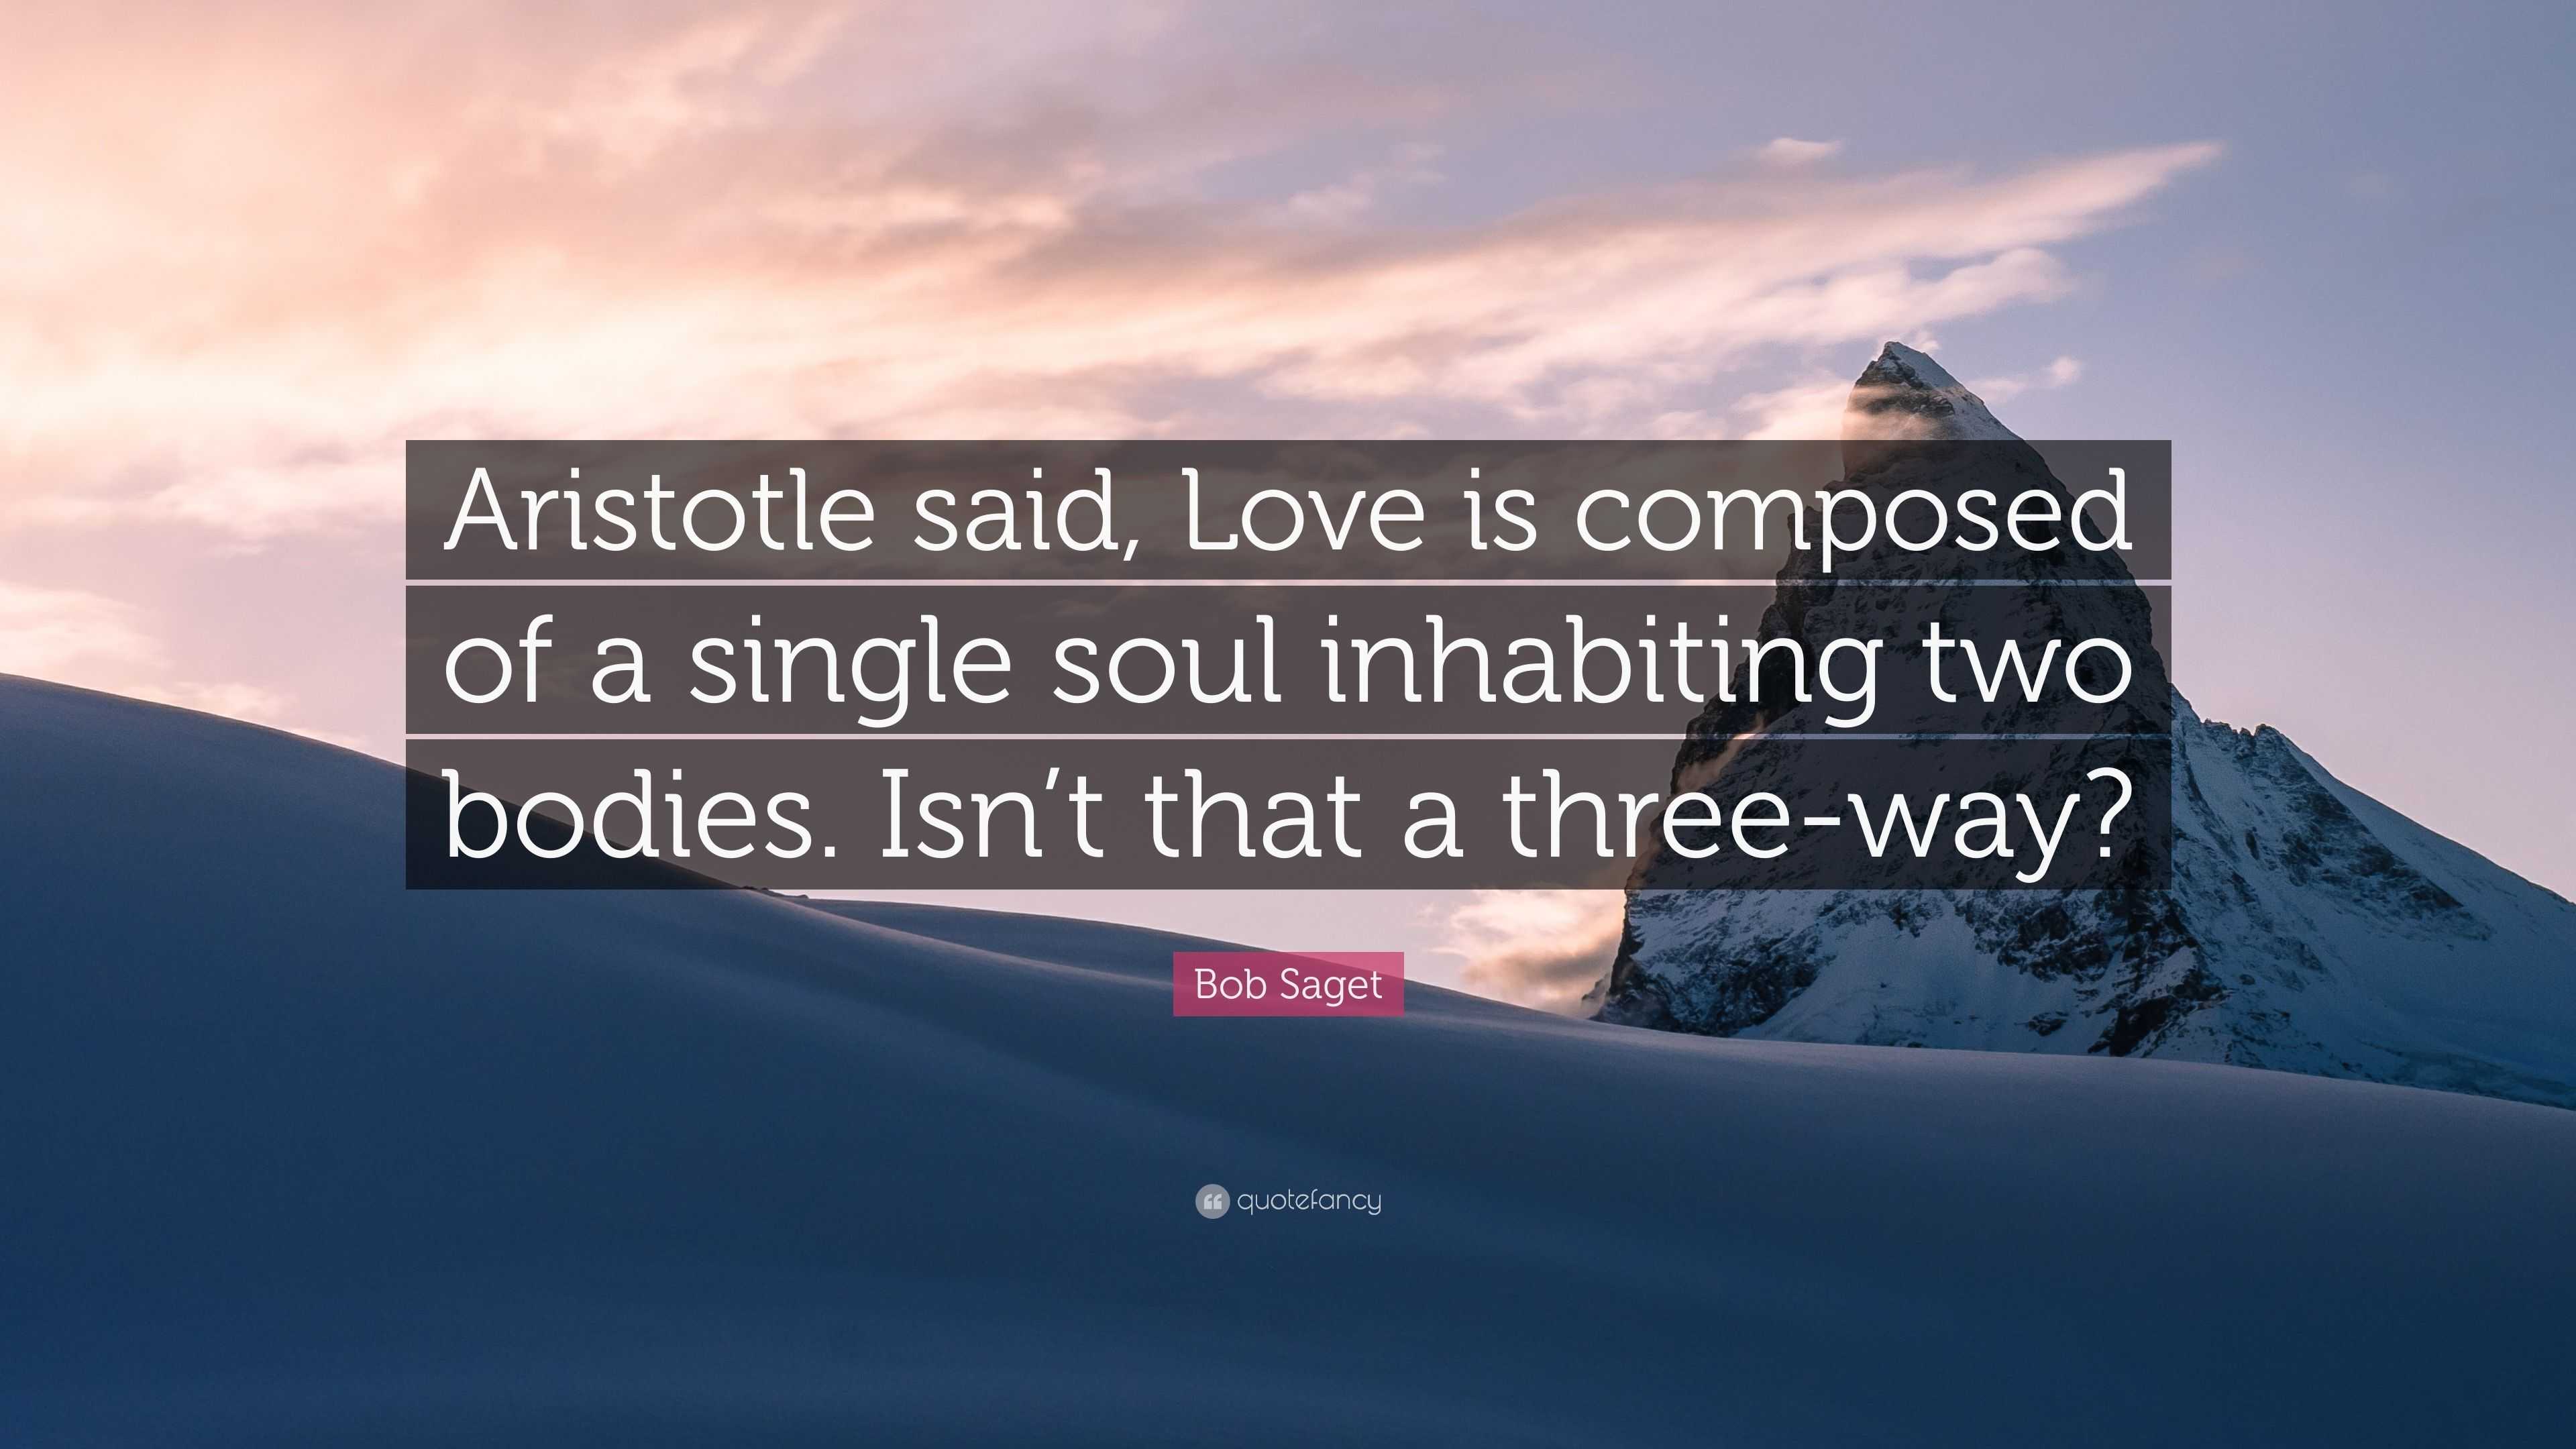 Bob Saget Quote “aristotle Said Love Is Composed Of A Single Soul Inhabiting Two Bodies Isn’t